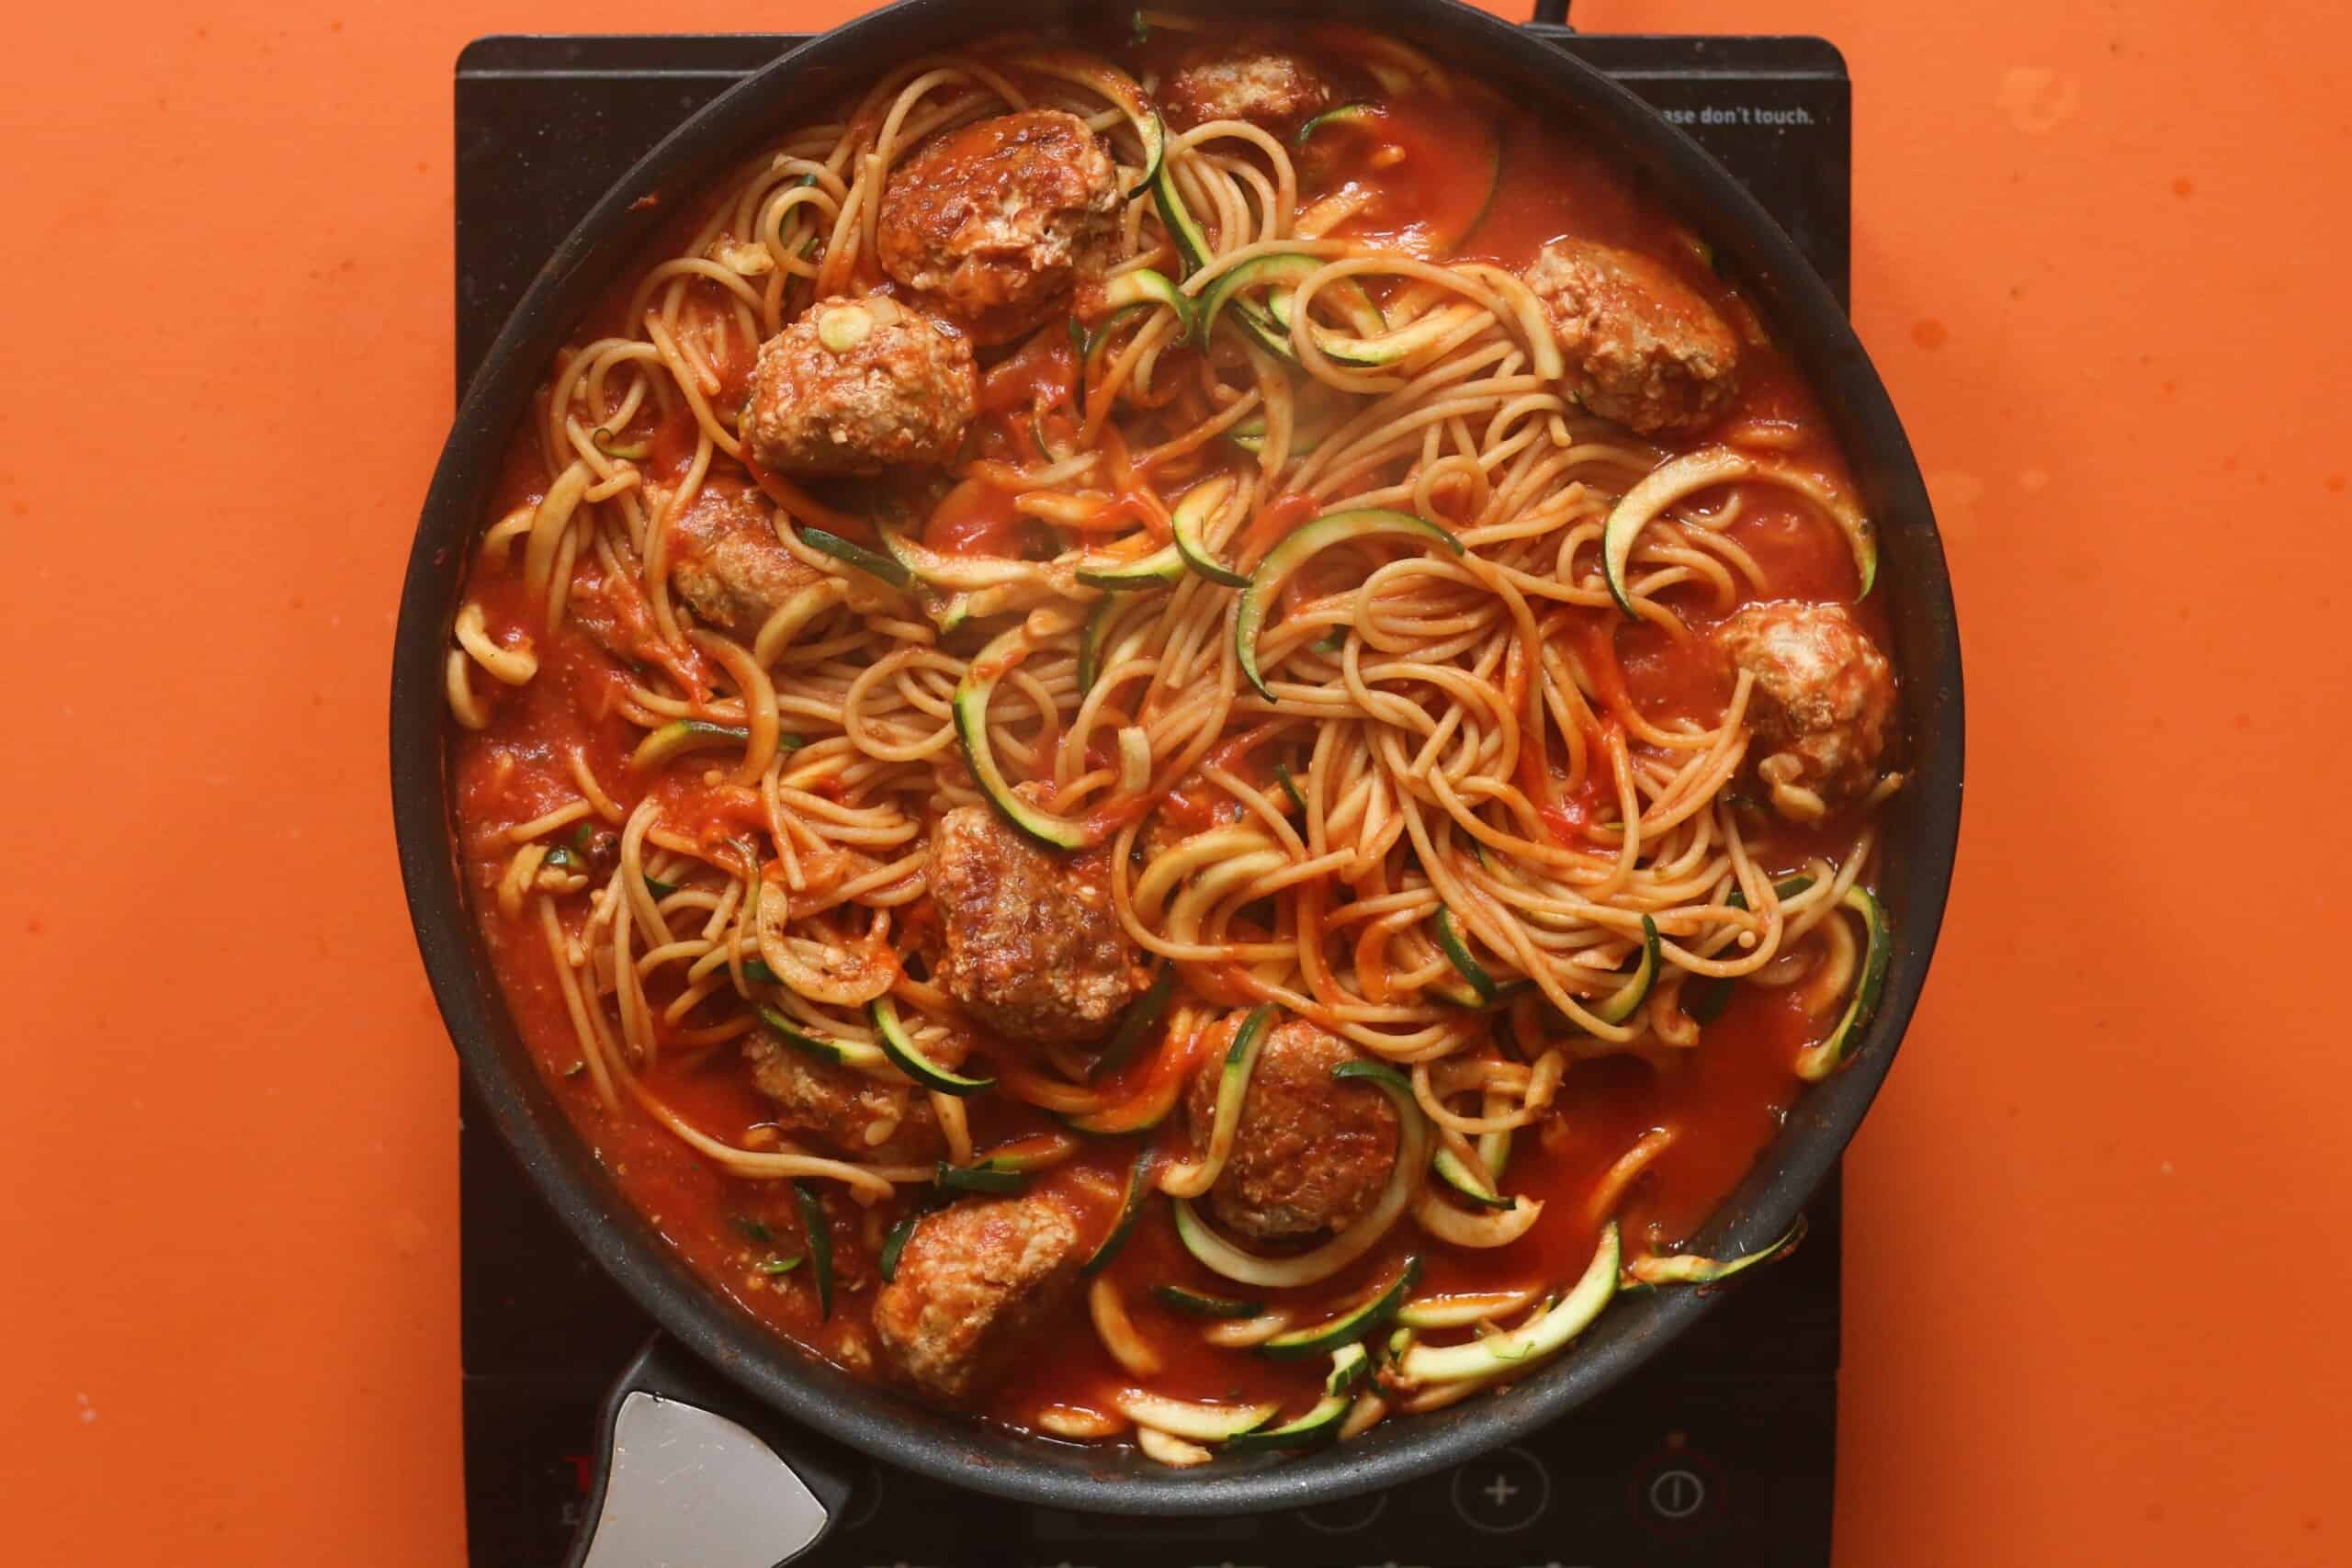 Meatballs added to the spaghetti and spiralised courgettes in tomato sauce in the pan on the stove on an orange background.